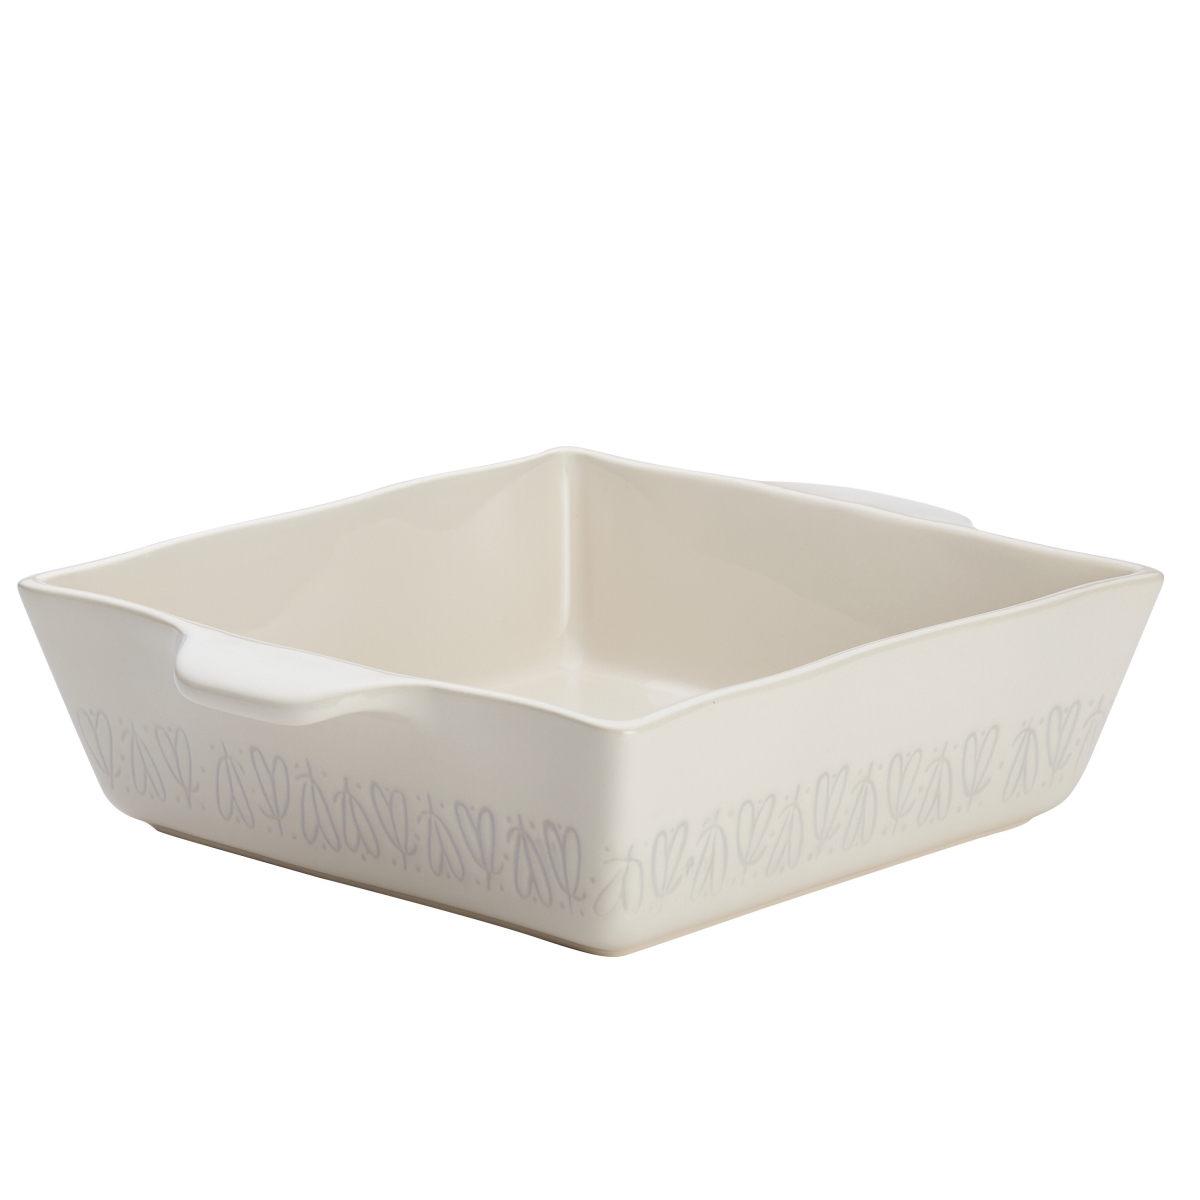 Picture of Ayesha Curry 46941 Ceramic Square Baker, 8 x 8 in. - French Vanilla